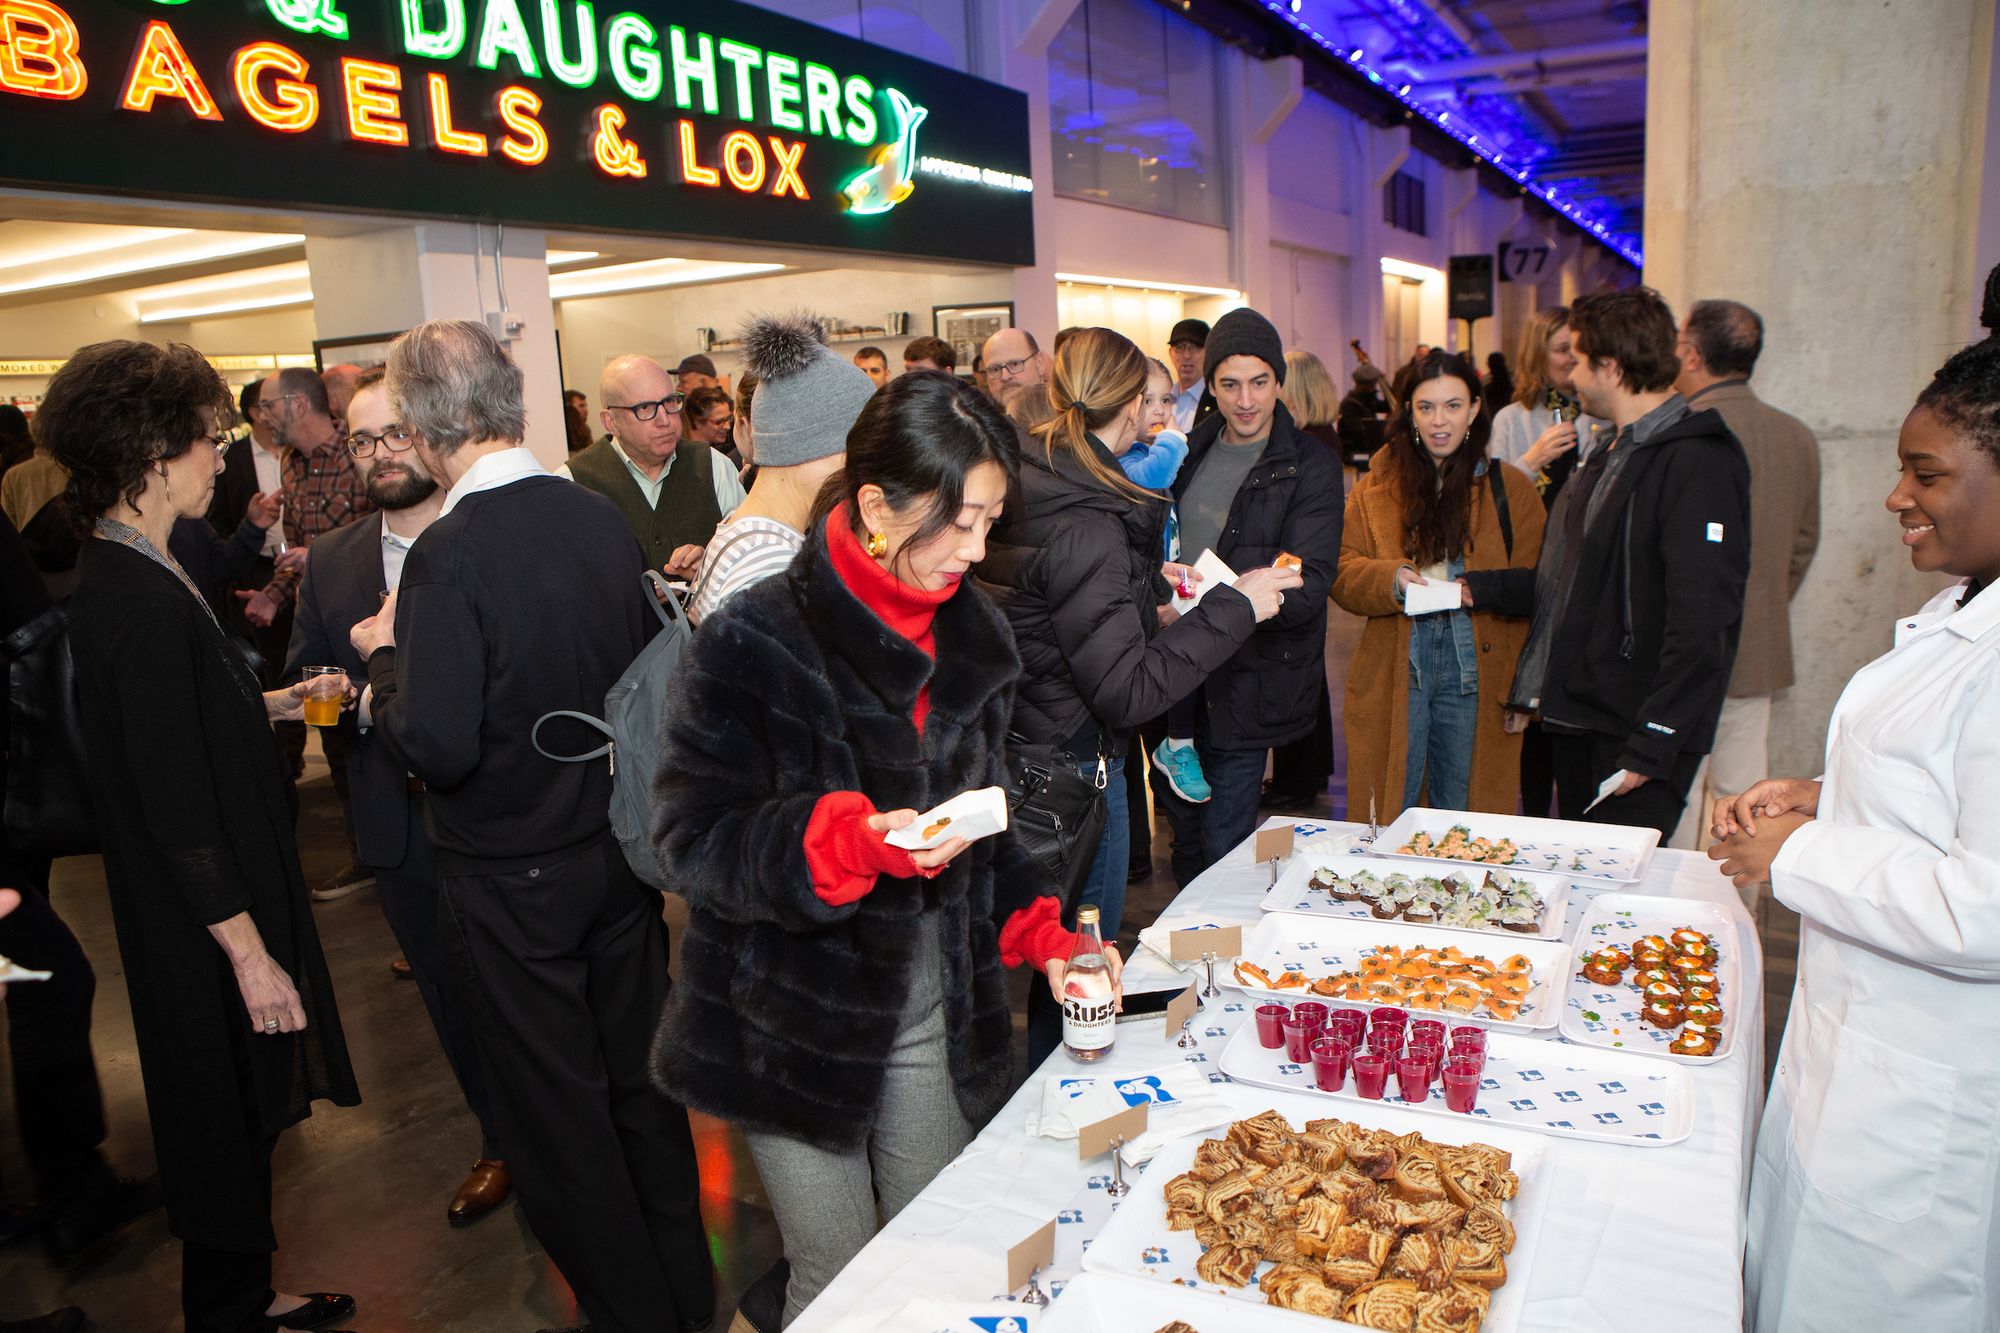 Russ & Daughters Opens In Brooklyn With Space For The Next Four Generations